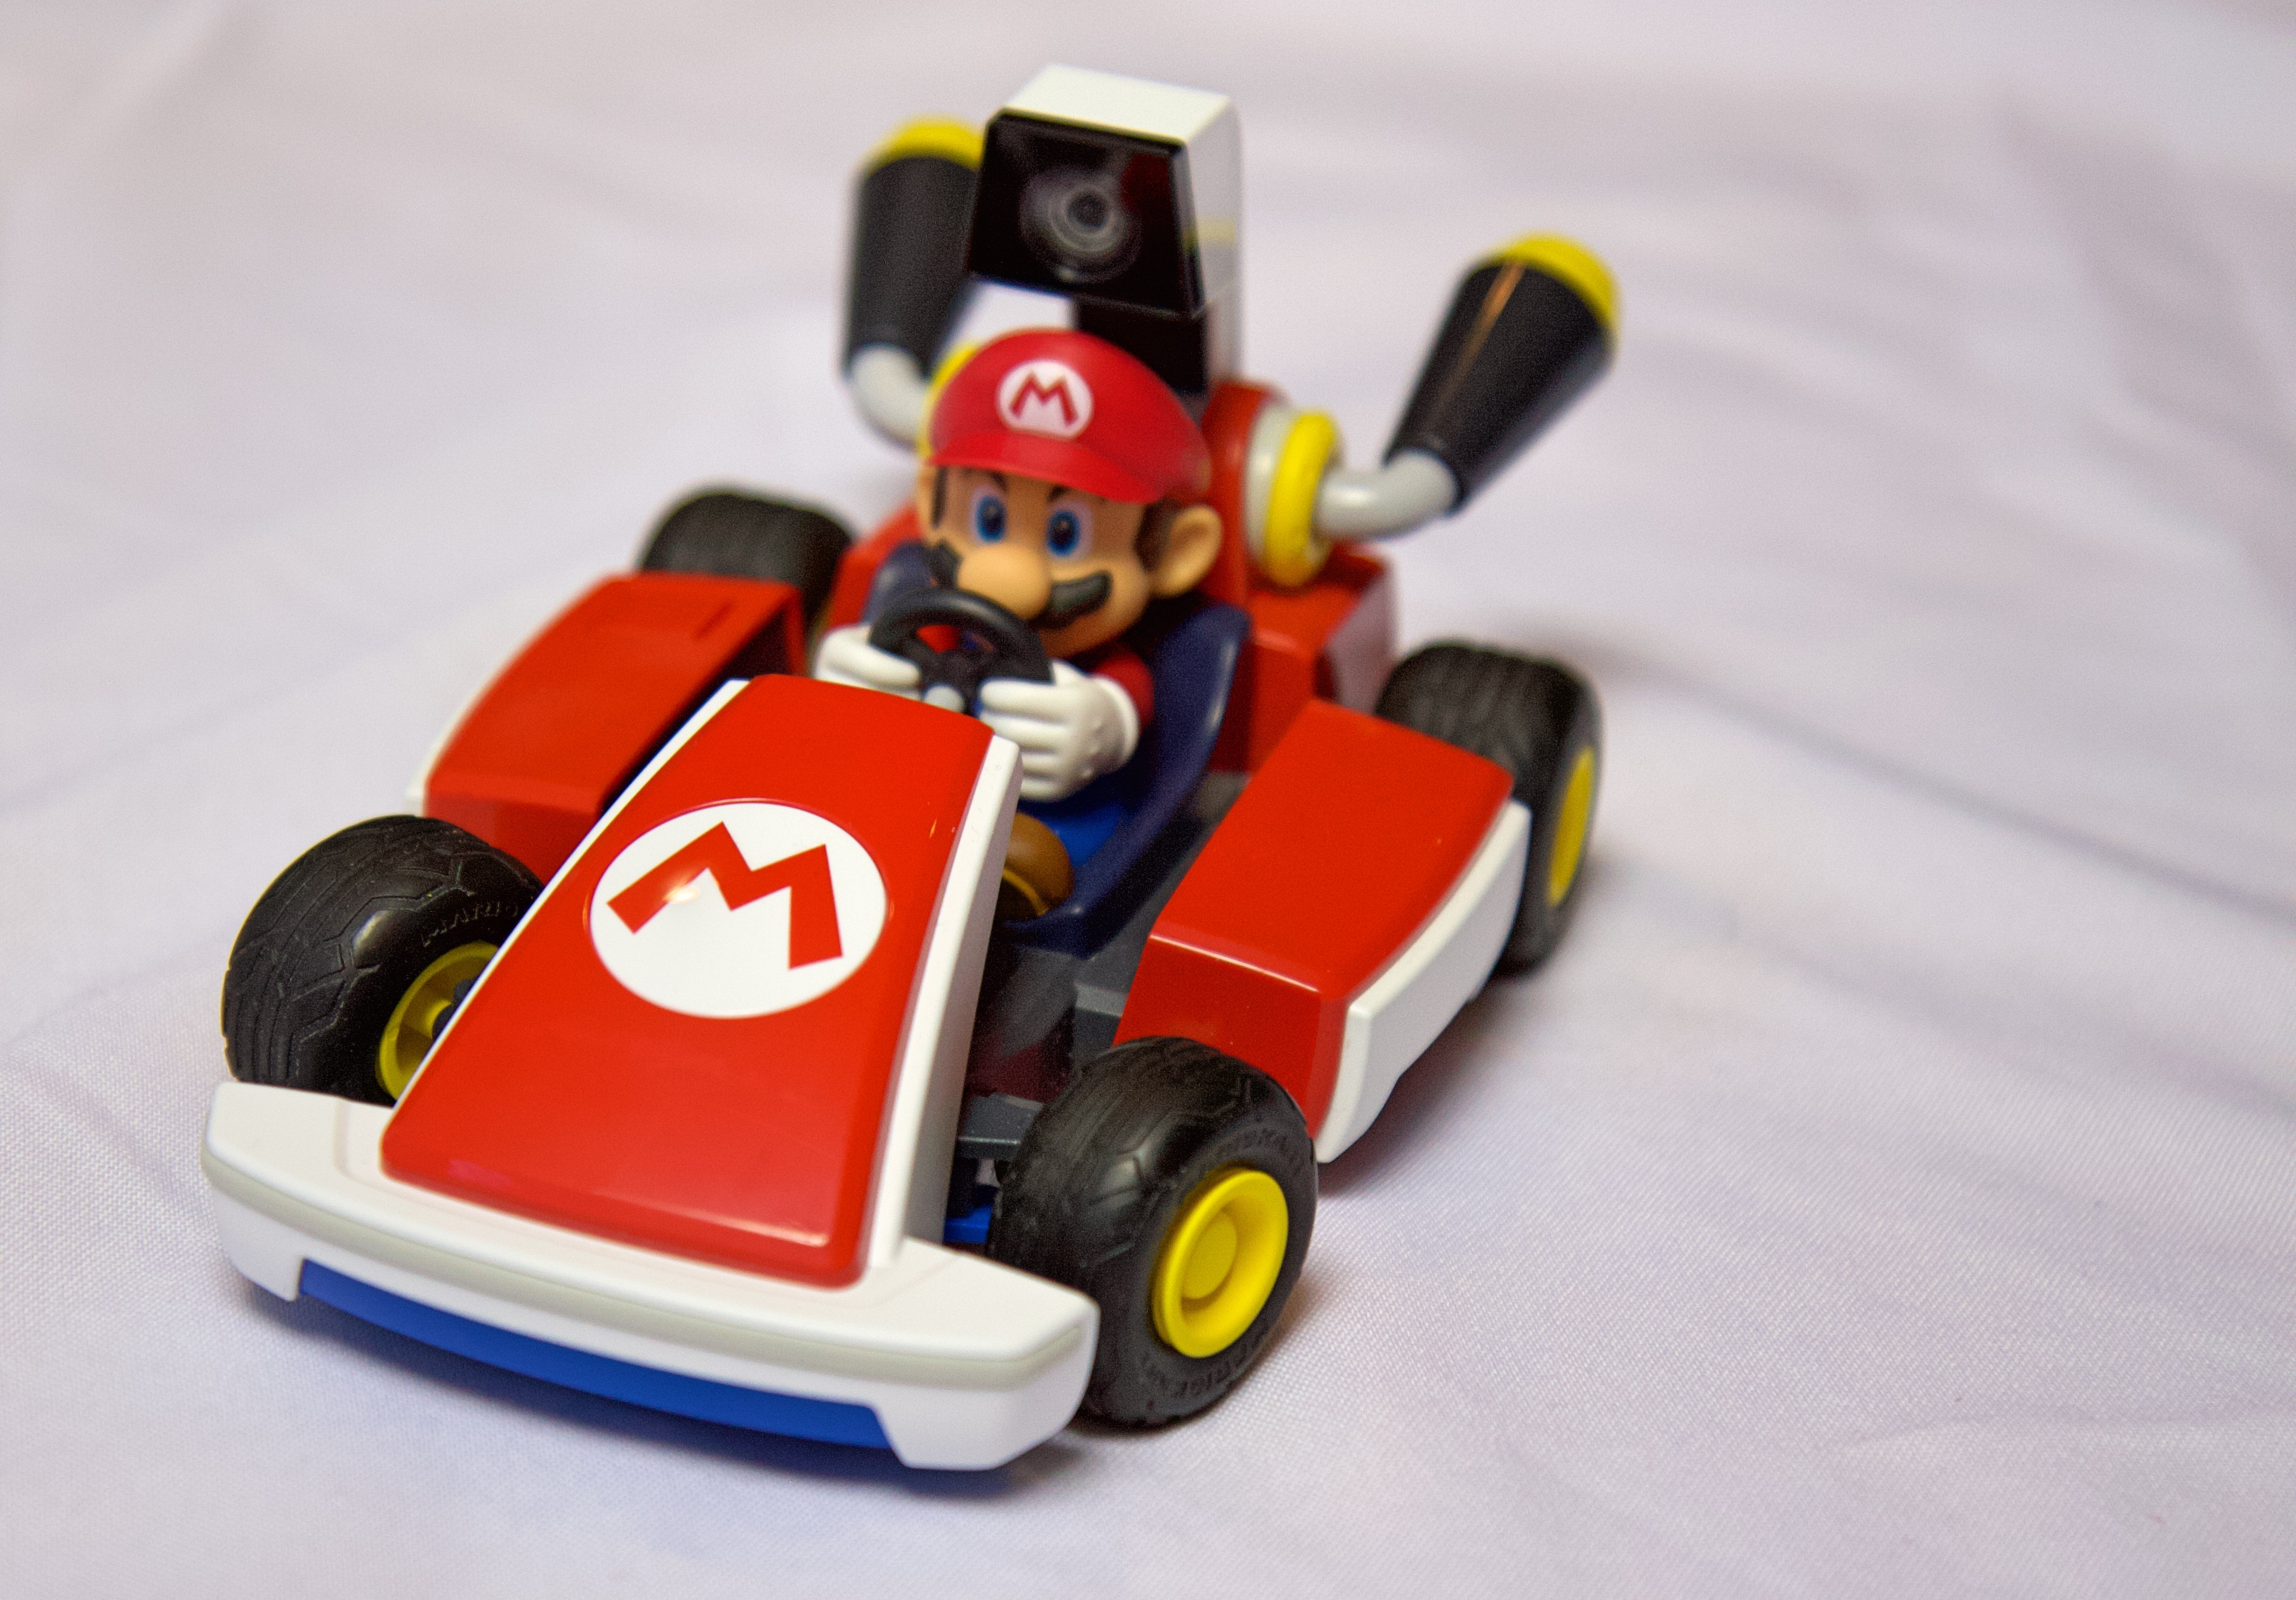 Mario Kart Live is a fun, if flawed, excuse to race around the